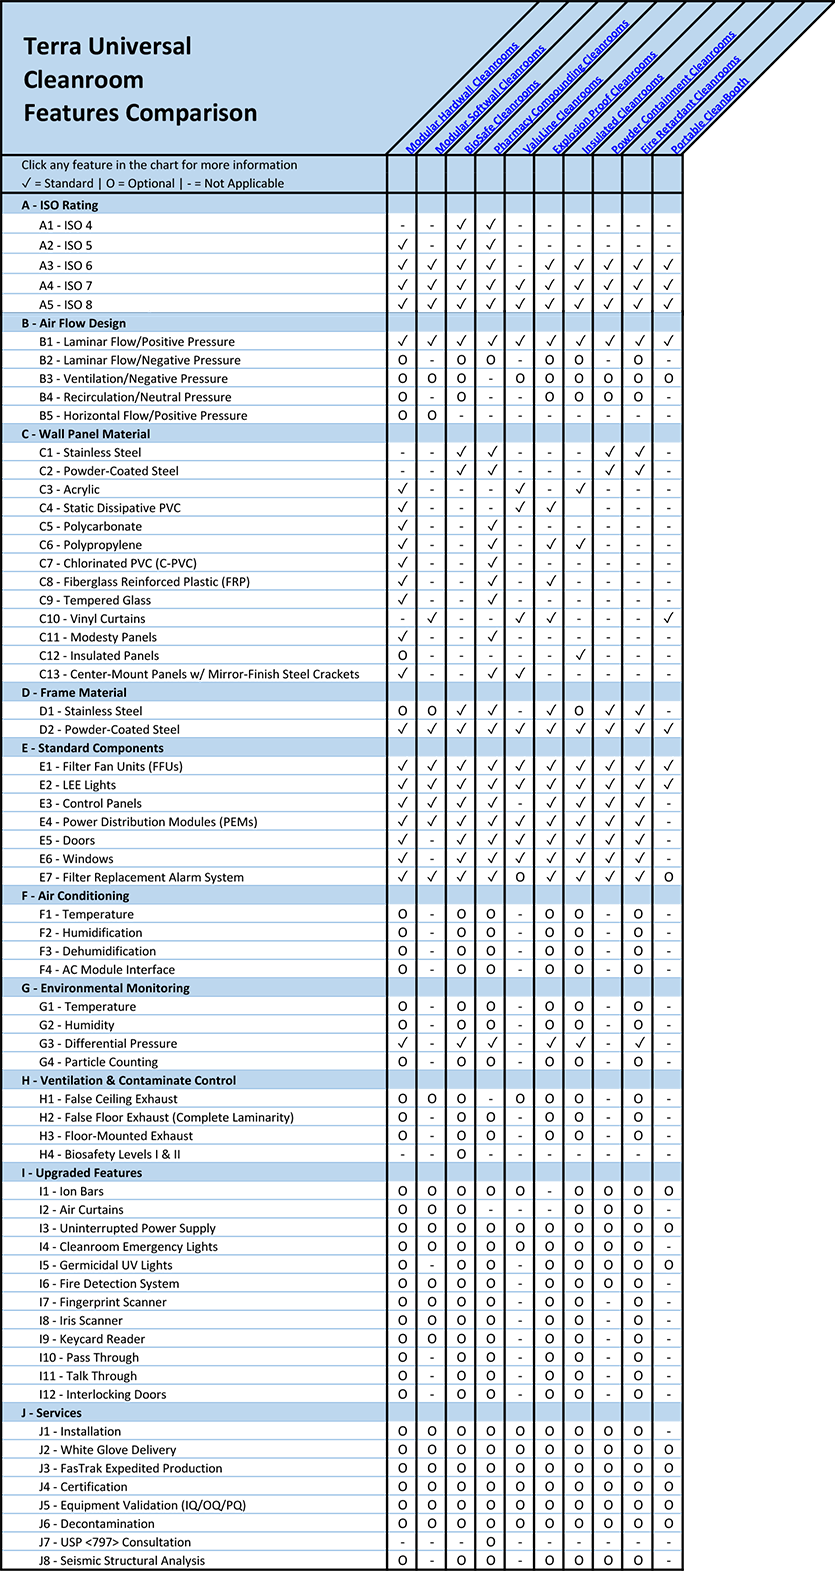 Master Cleanroom Feature Comparison Overview Chart